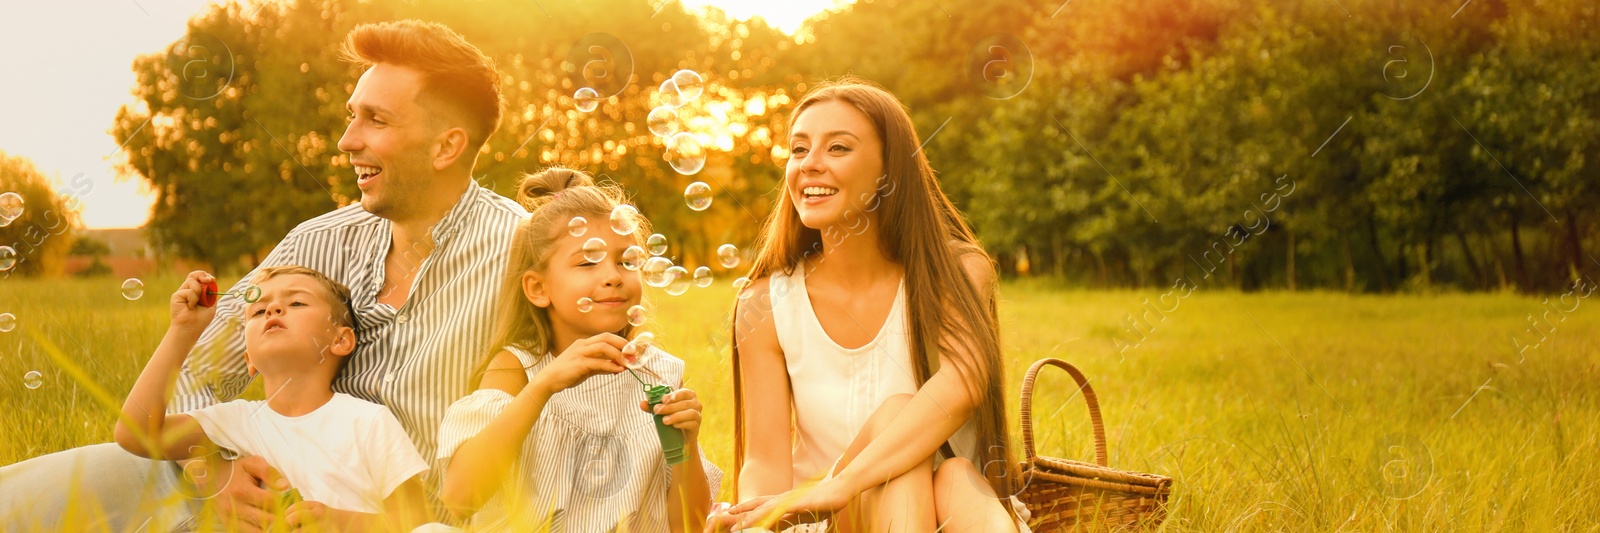 Image of Happy family blowing soap bubbles in park at sunset. Banner design